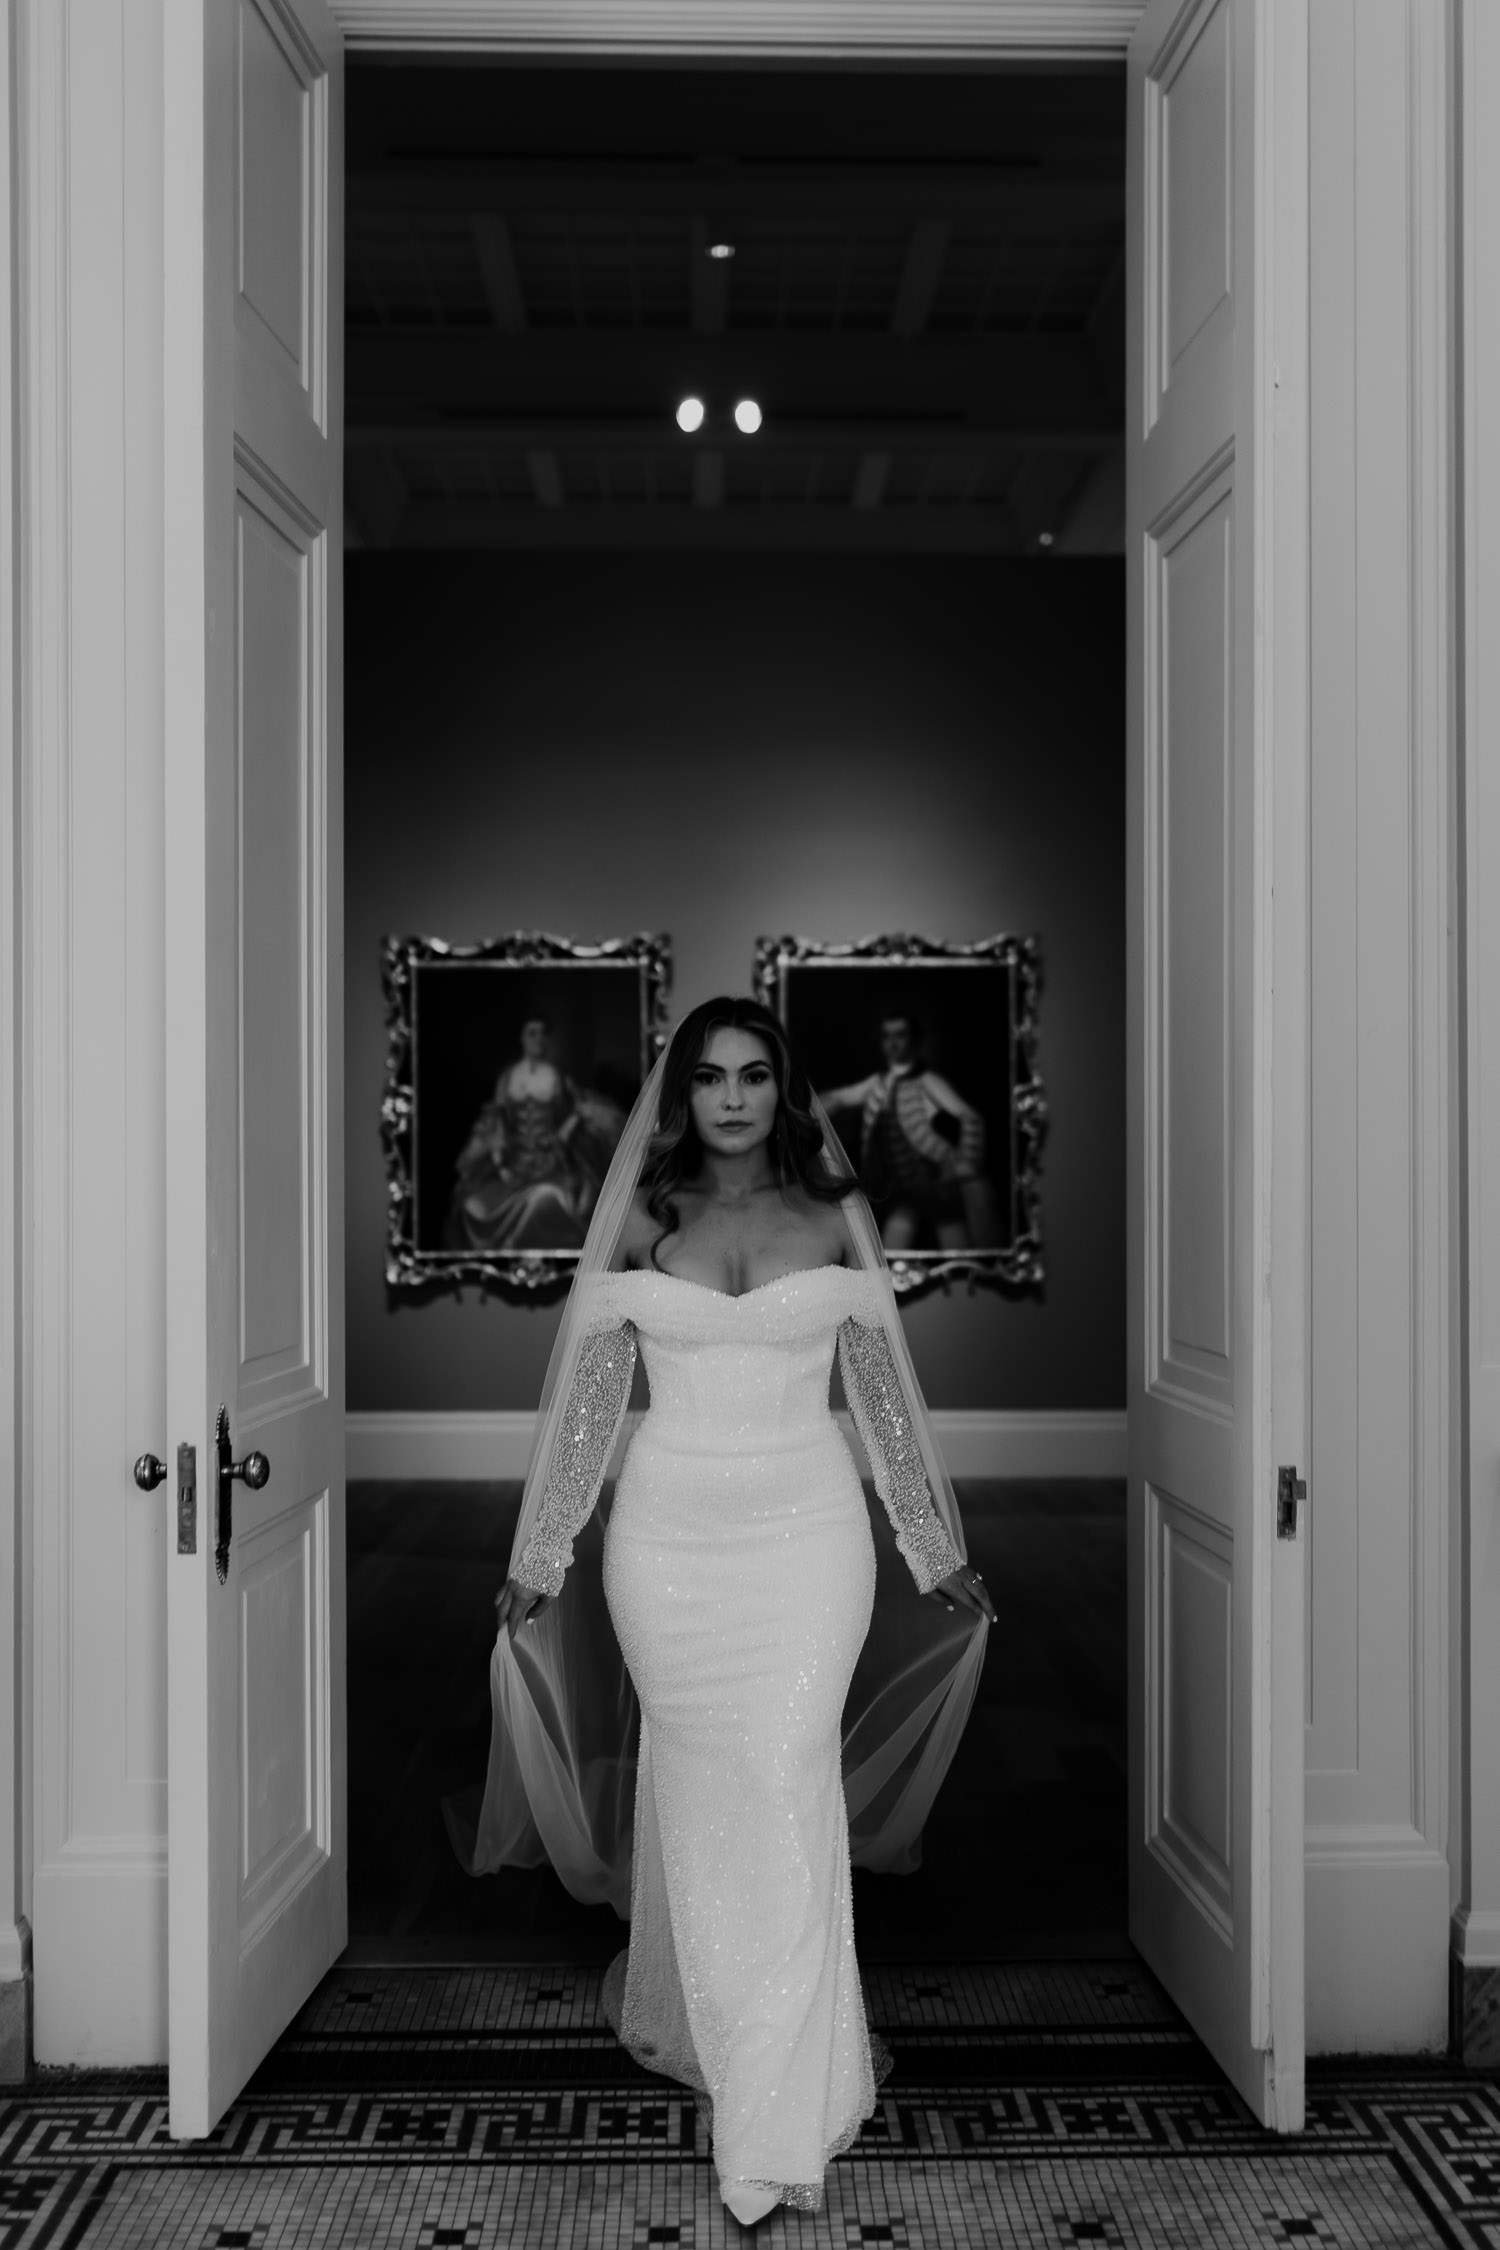 Black & white bridal photo of bride walking through door with paintings in background